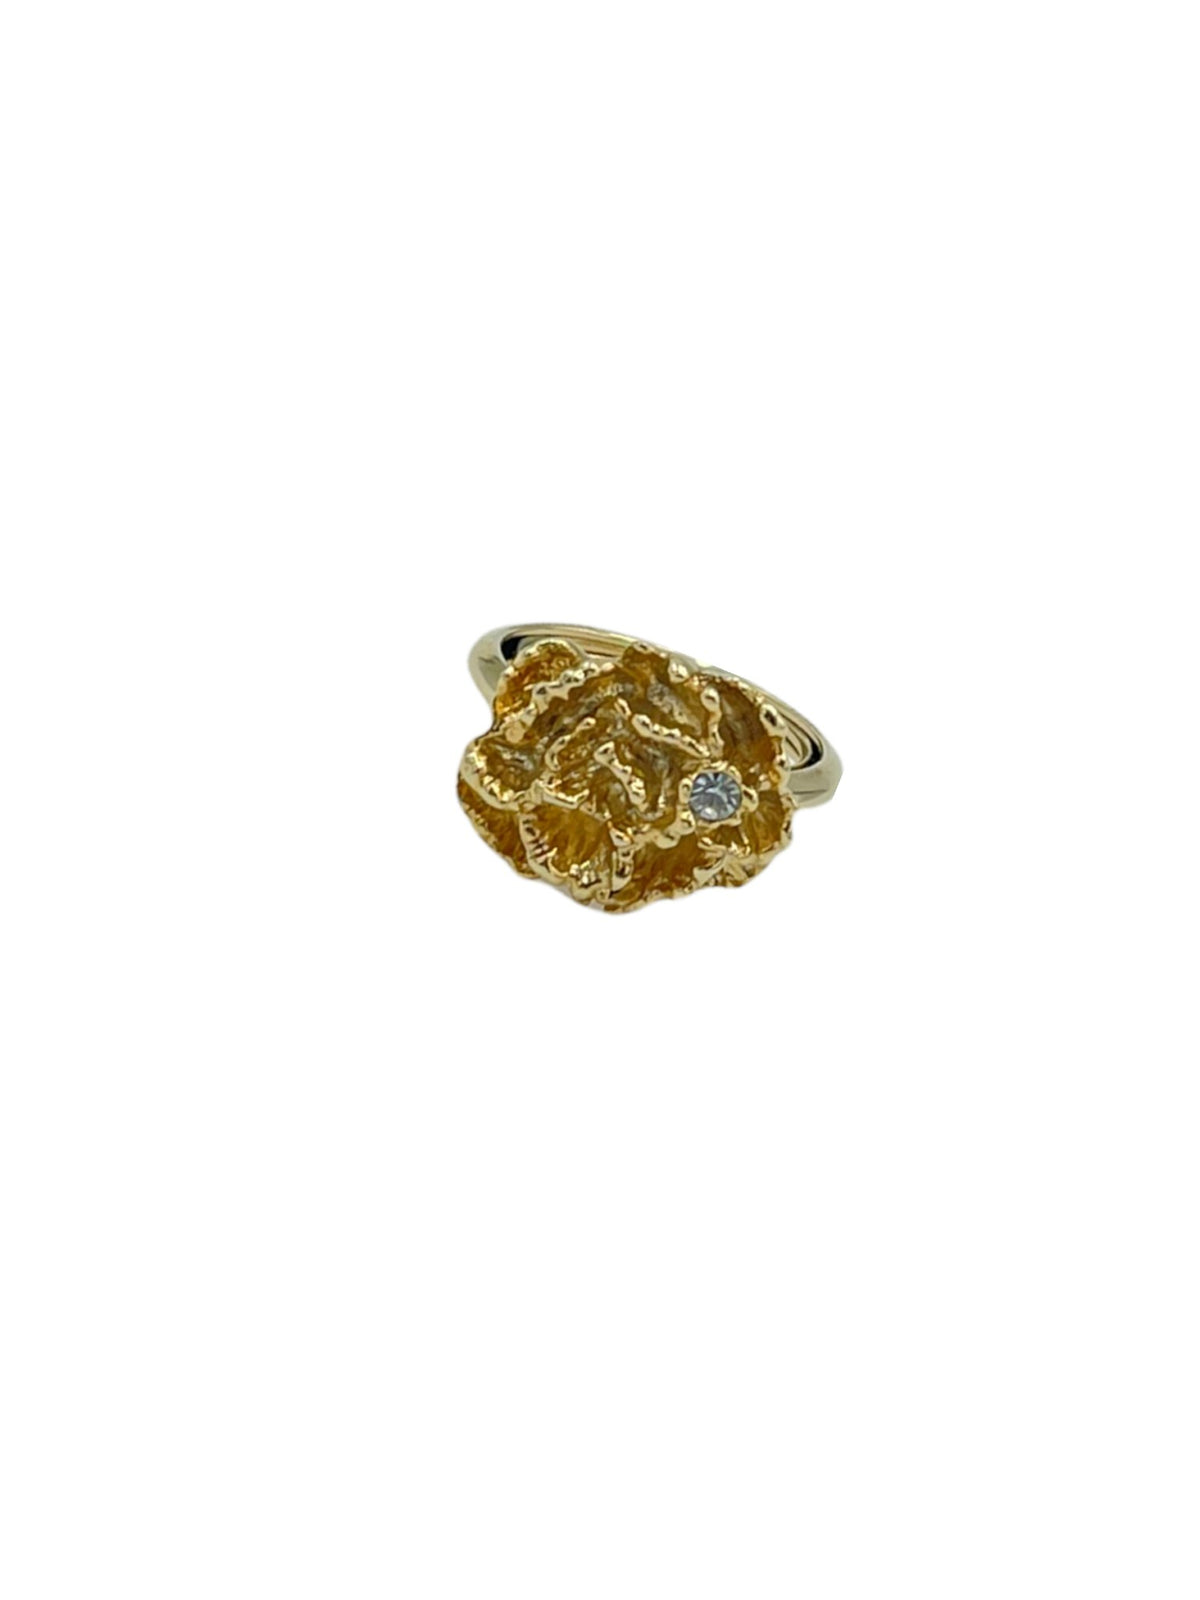 Avon Gold Floral Vintage Adjustable Cocktail Ring - 24 Wishes Vintage Jewelry